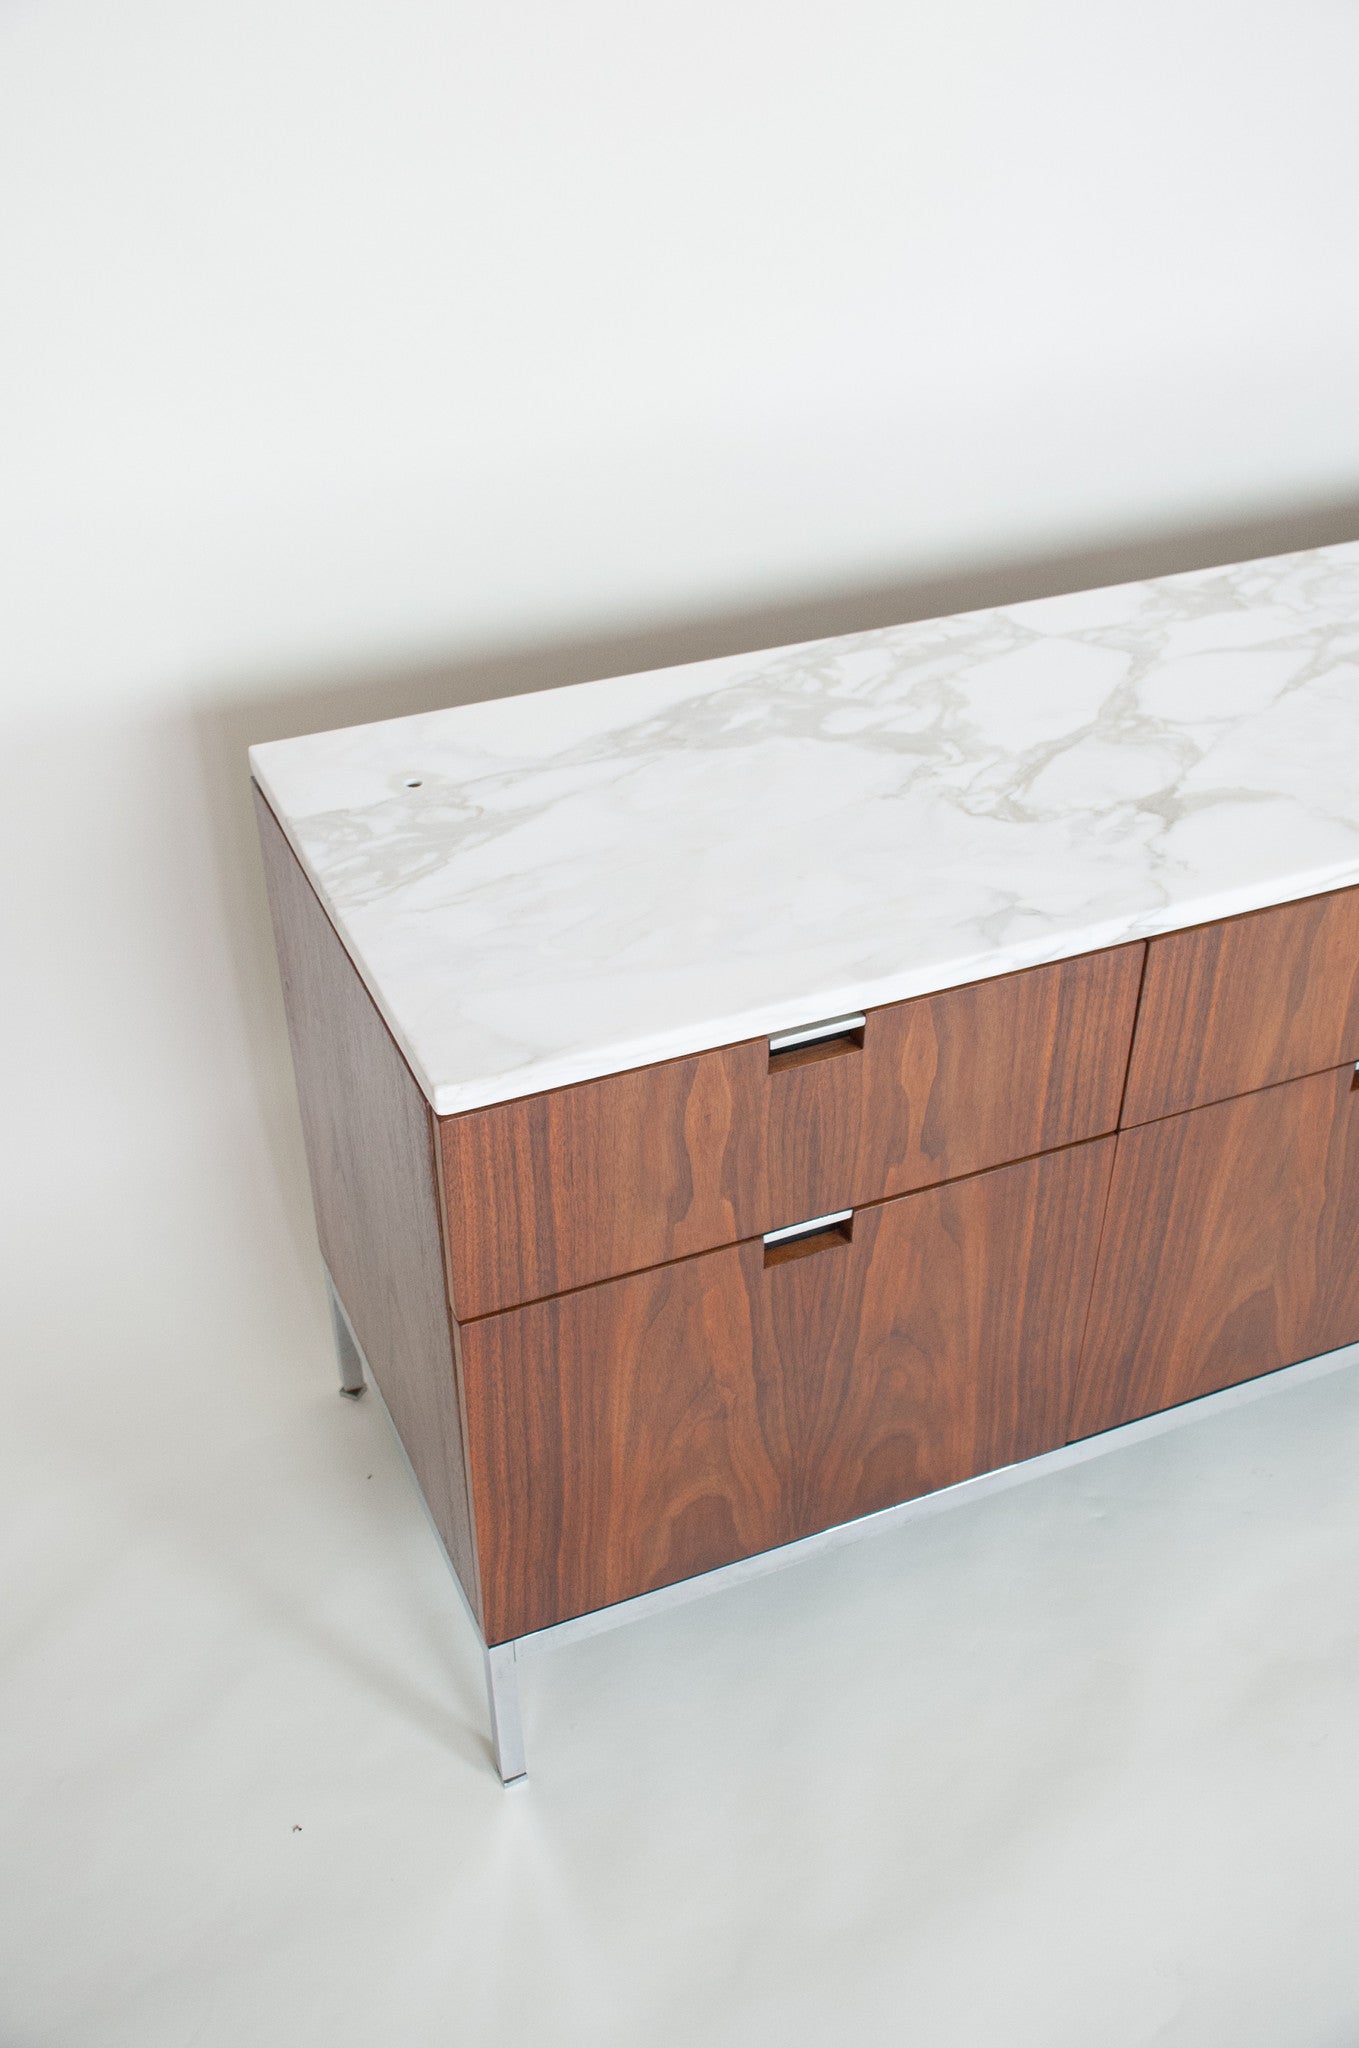 SOLD Florence Knoll Vintage Wood and Marble Credenza Cabinet Sideboard Stunning!